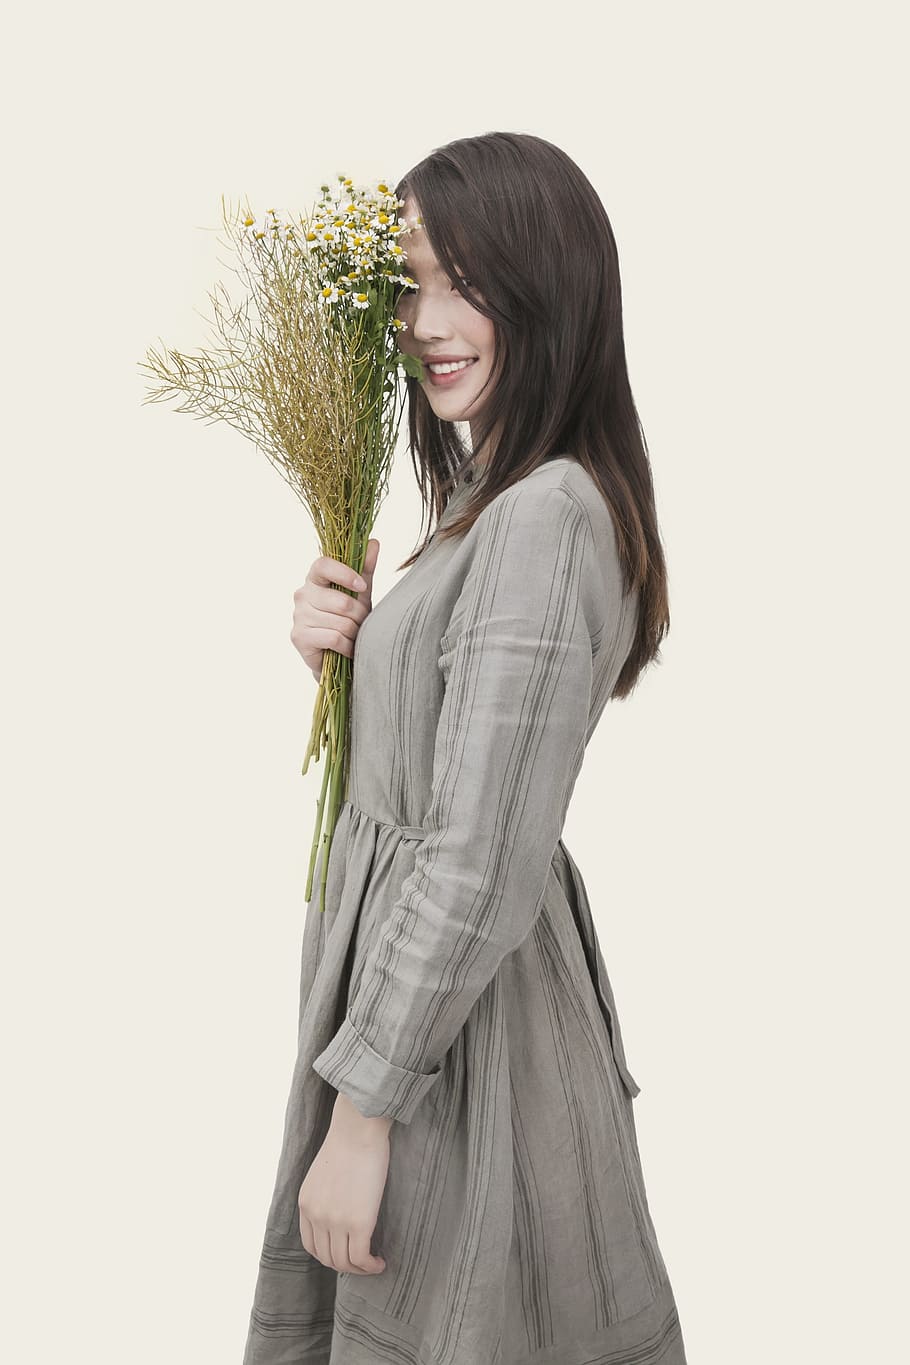 smiling, woman, wearing, gray, long-sleeved, dress, holding, bouquet, flowers, girl